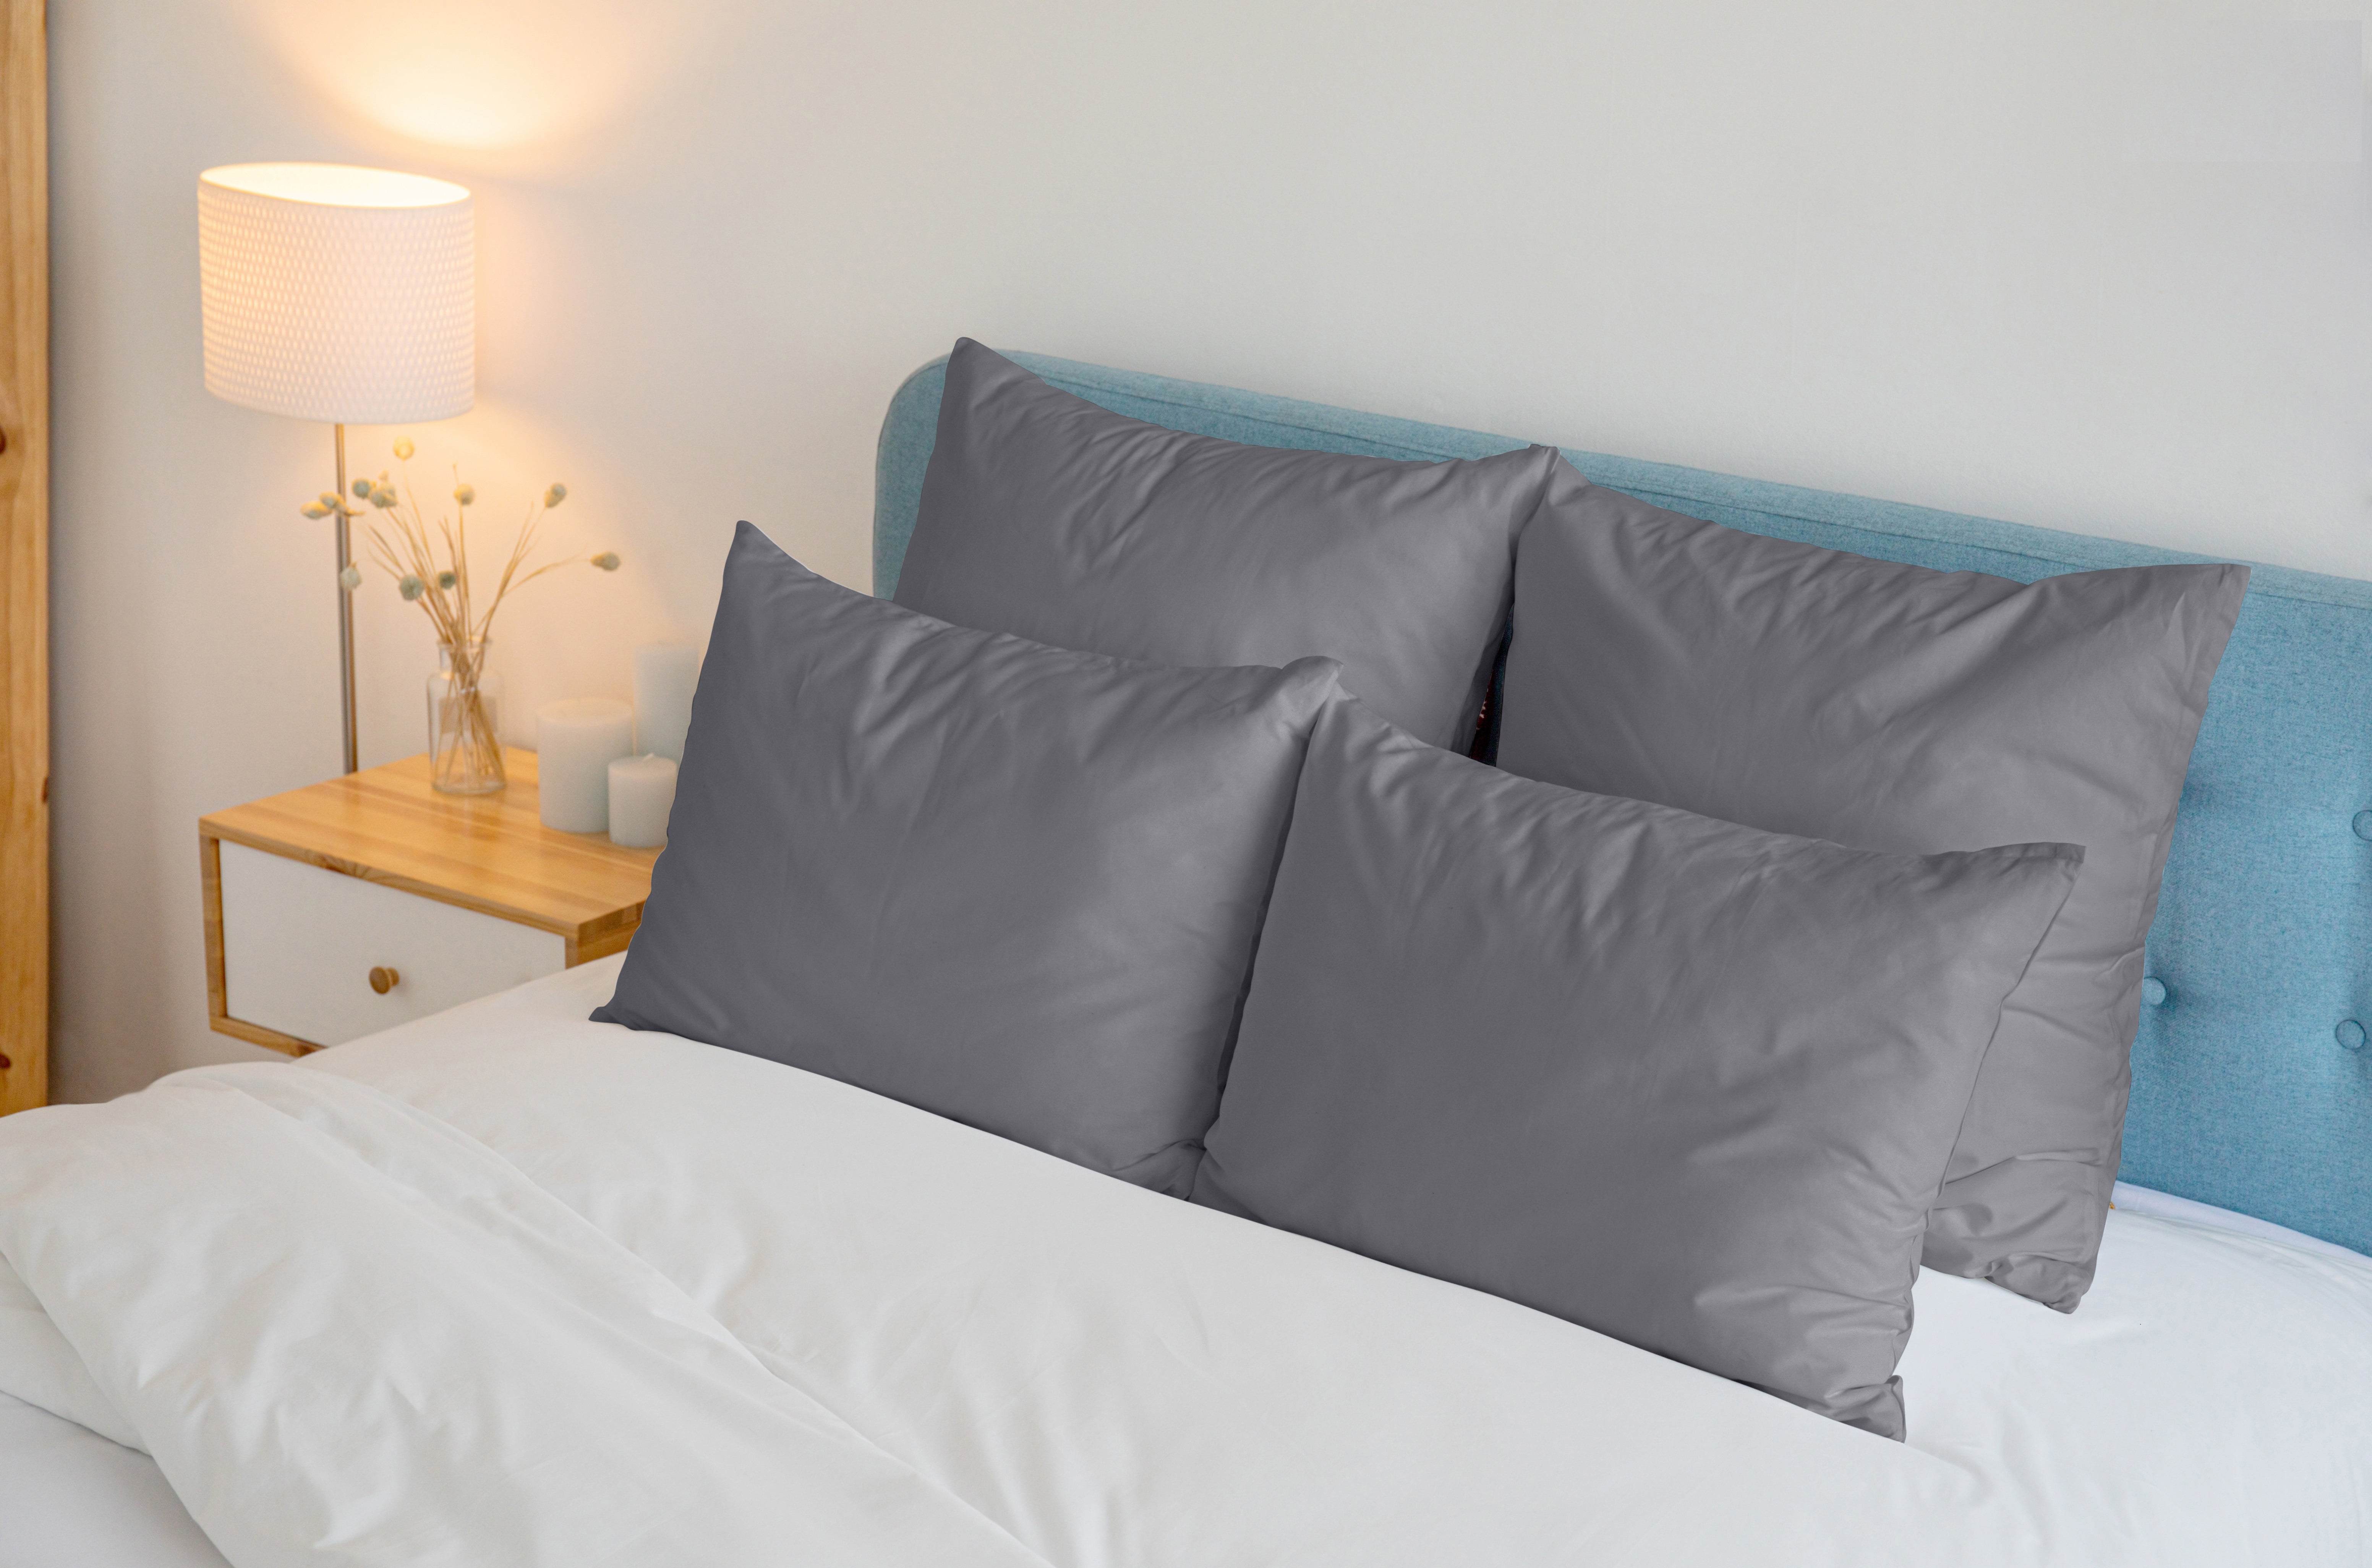 The Giant Pillowcase - Extra Large Extra Tall Pillowcases. 100% Microfiber.  2-Pack (White, King 25Wx43L) Fits Even The Fluffiest Pillows Including The